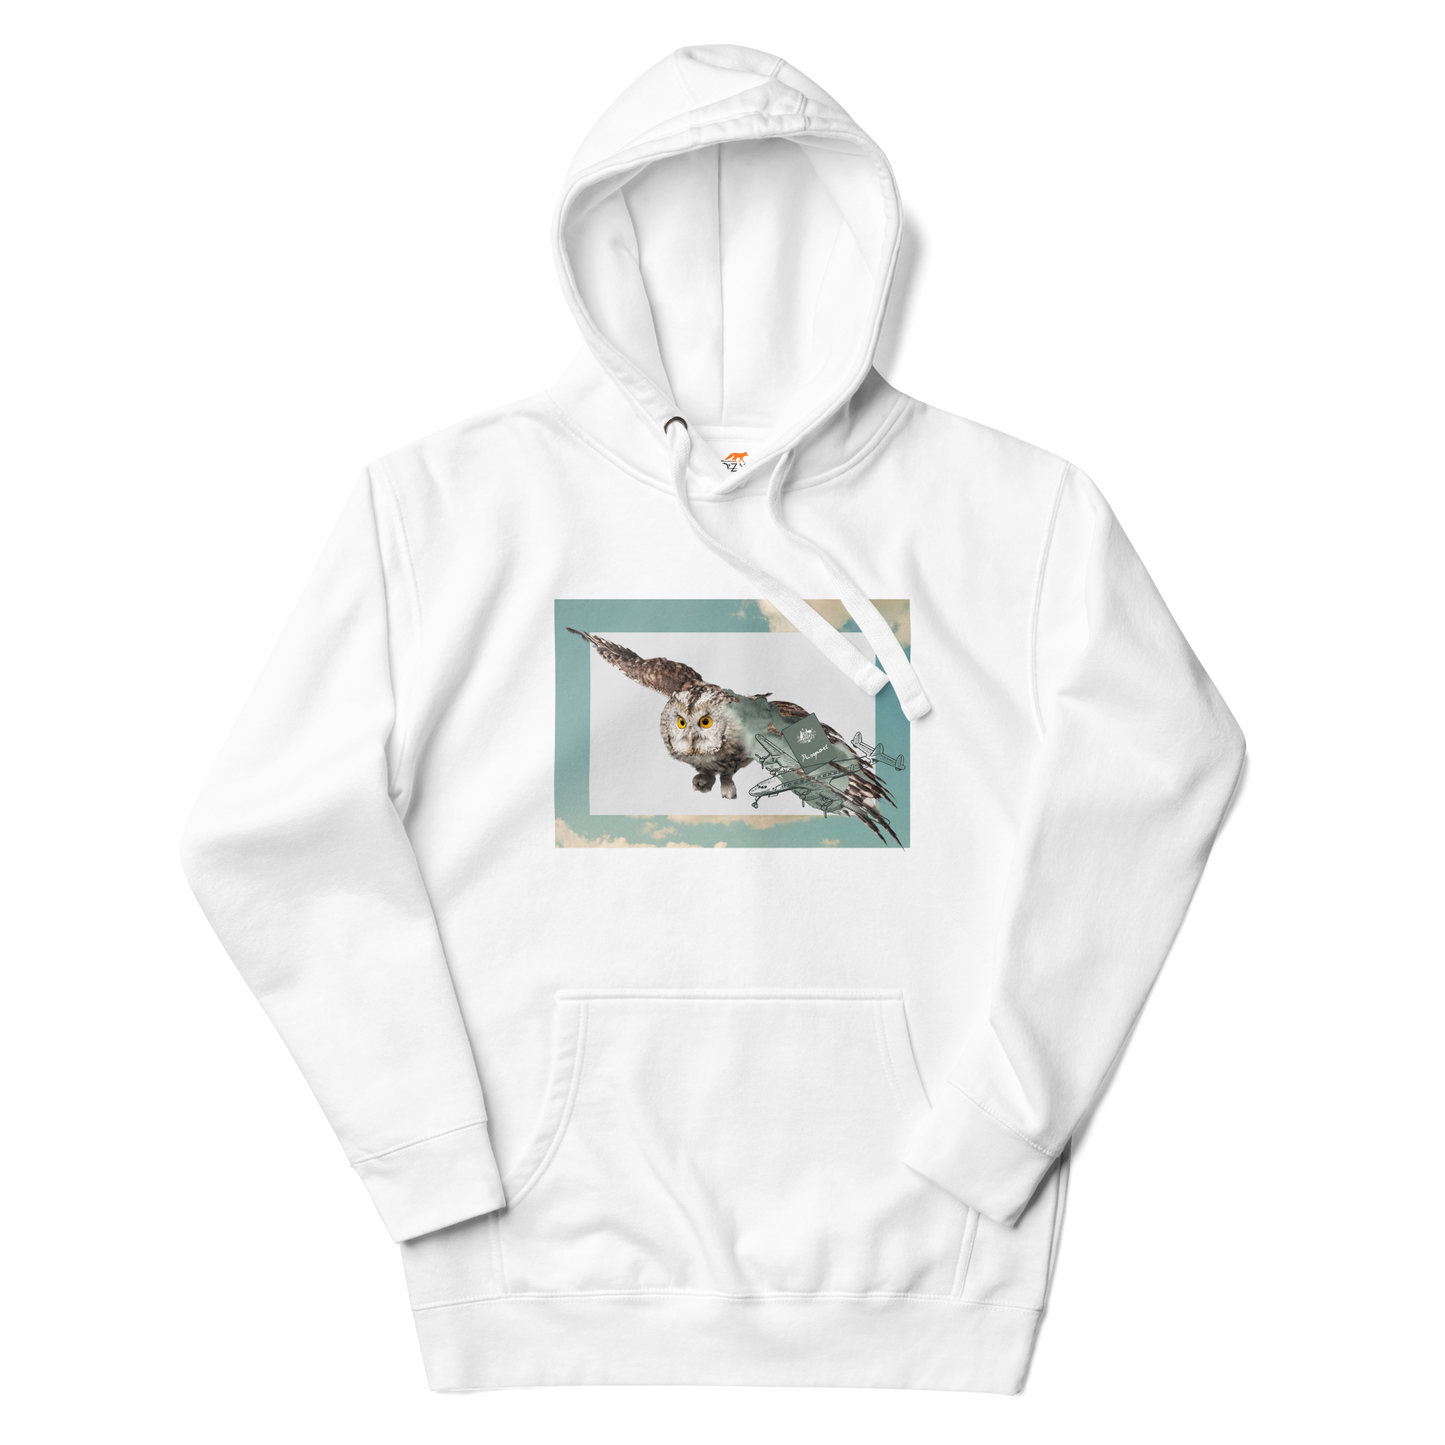 White Premium Owl Hoodie featuring a cool Flying Owl graphic on the chest - Cool Graphic Owl Hoodies - Boozy Fox